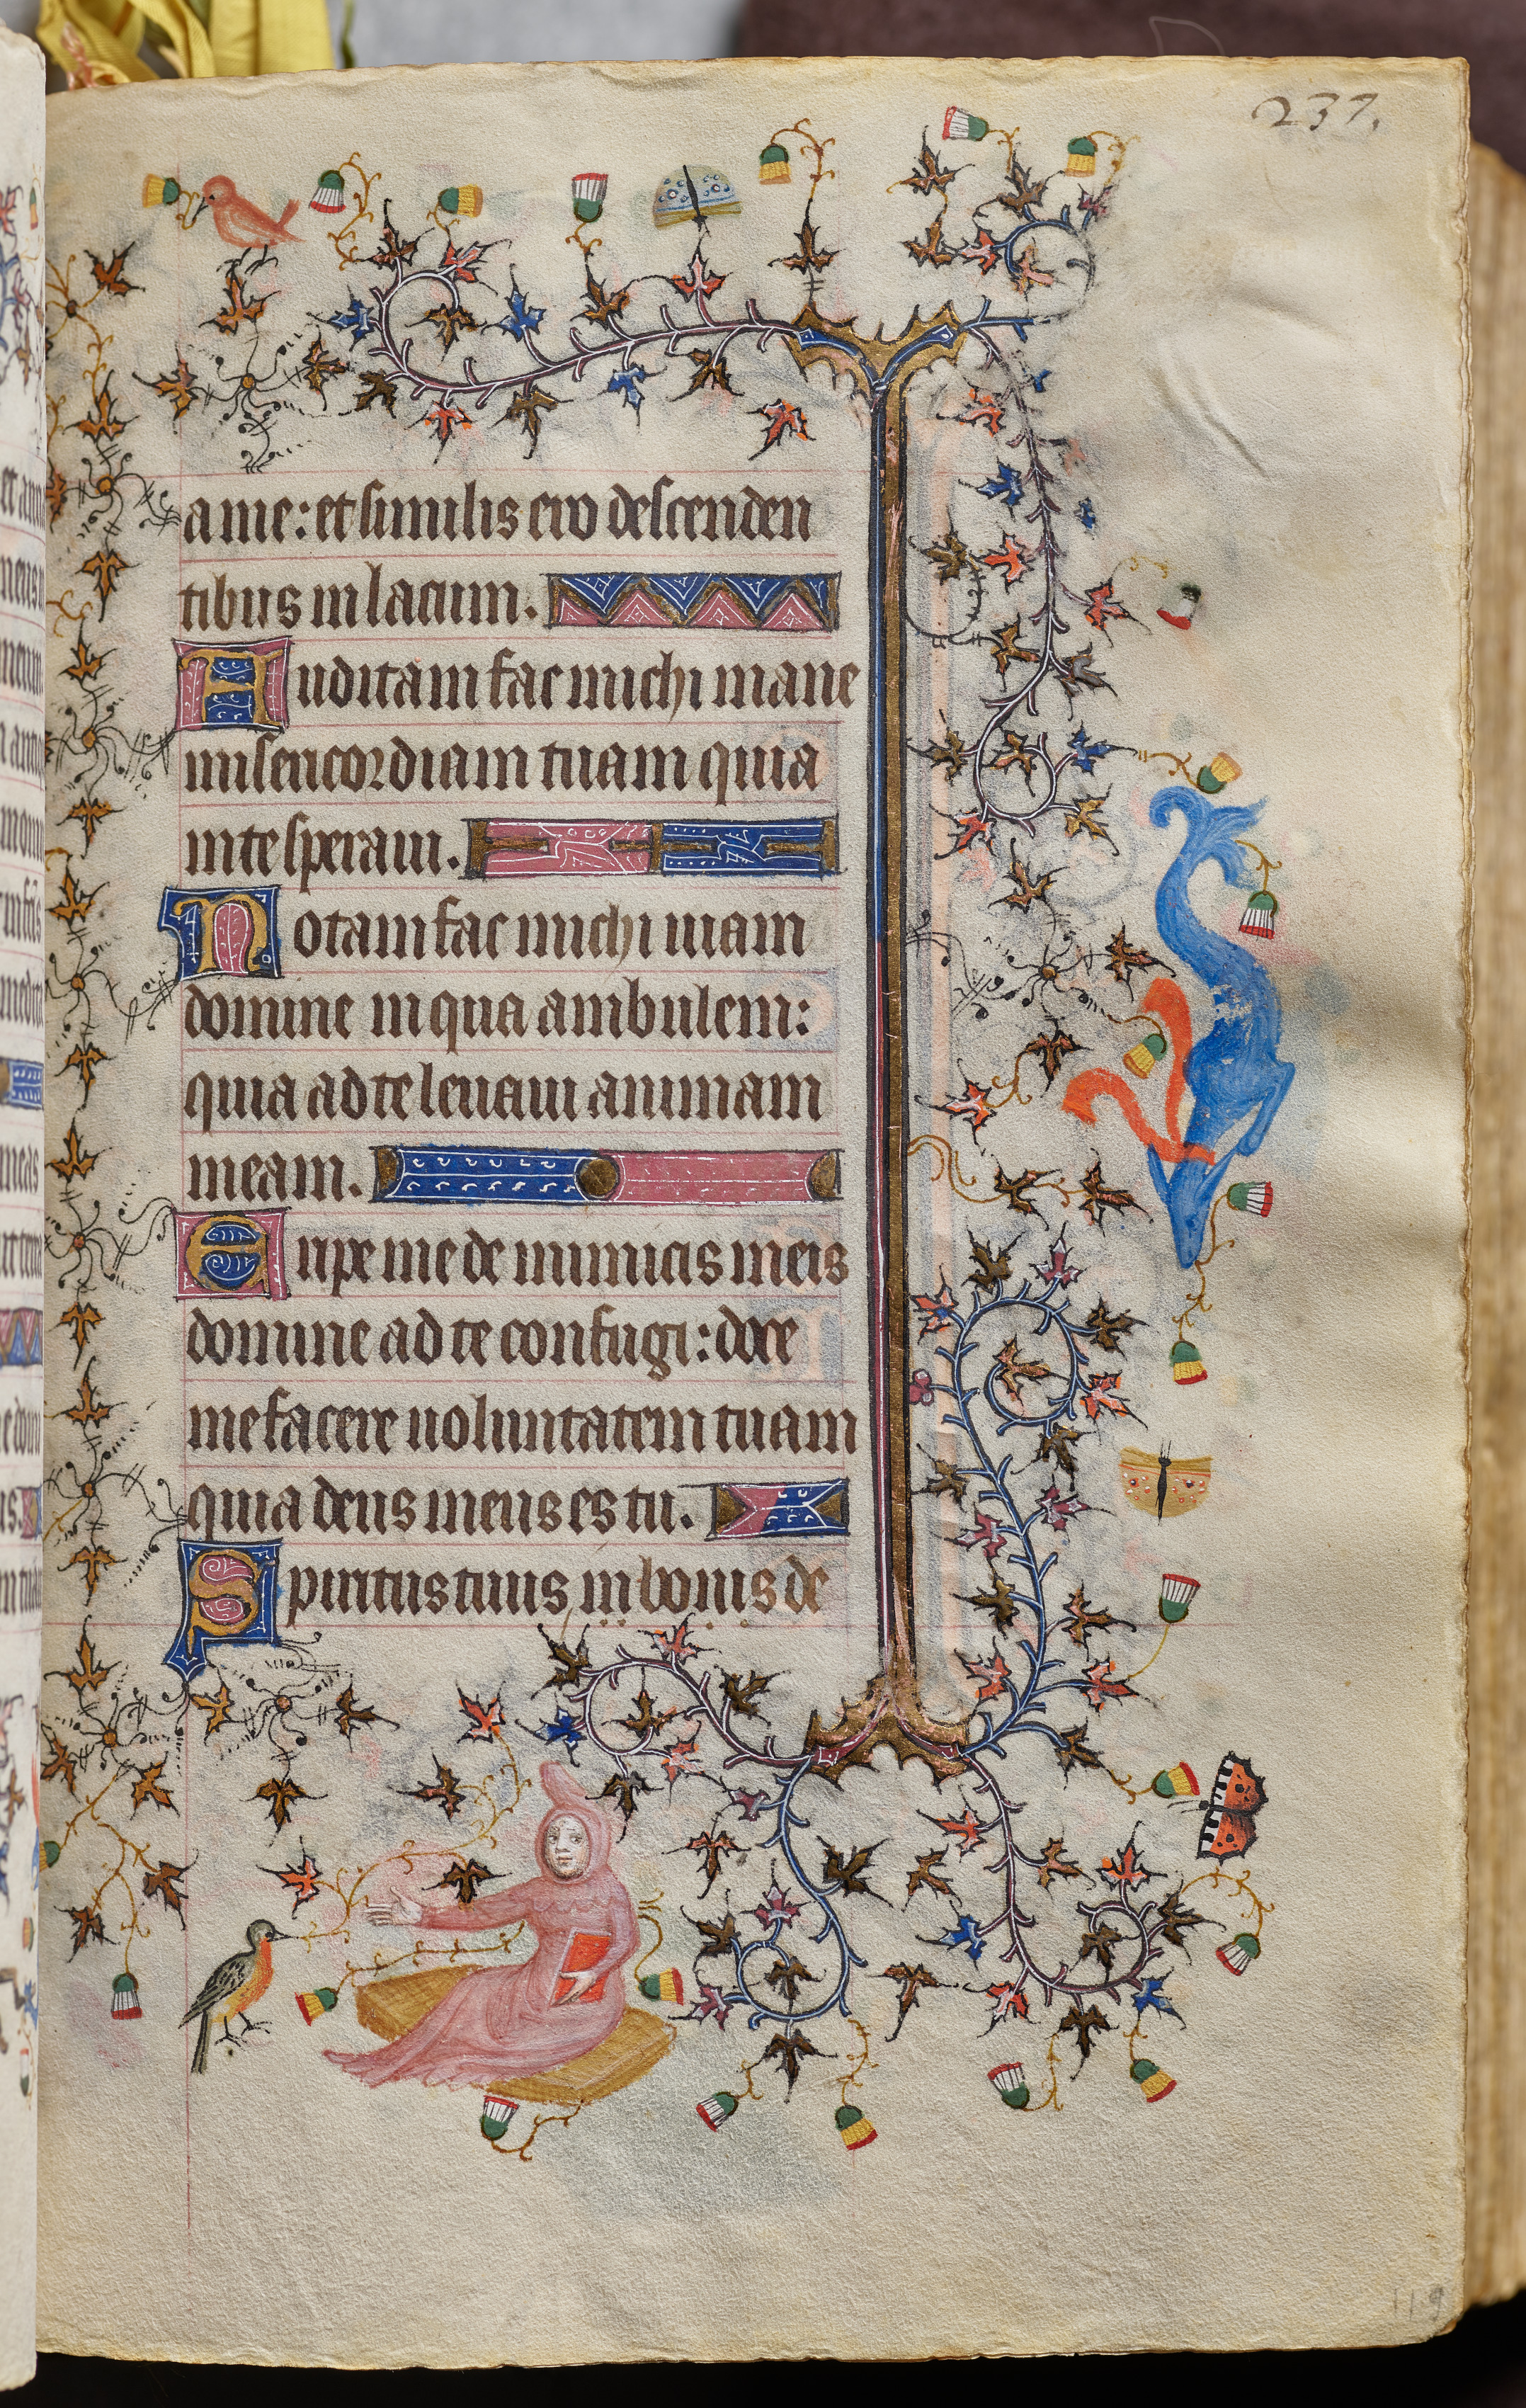 Hours of Charles the Noble, King of Navarre (1361-1425): fol. 119r, Text